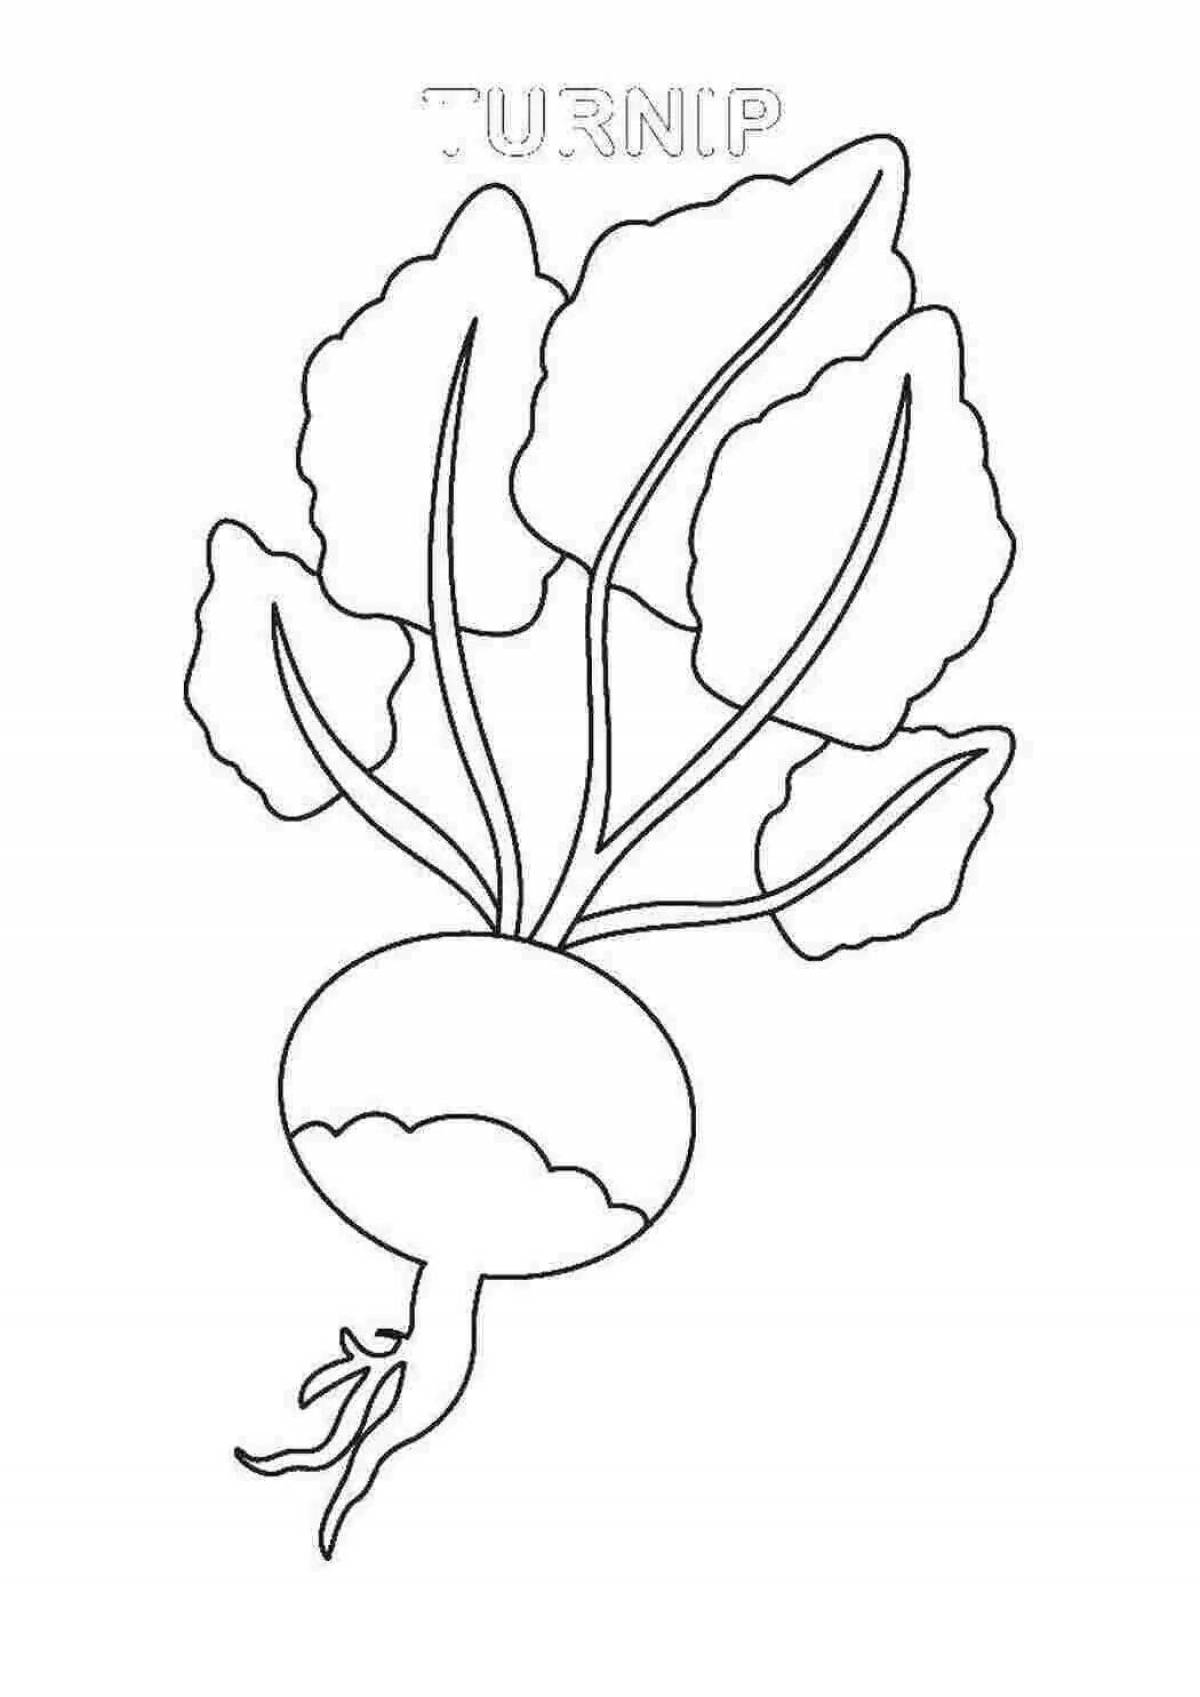 Animated tops and roots coloring page